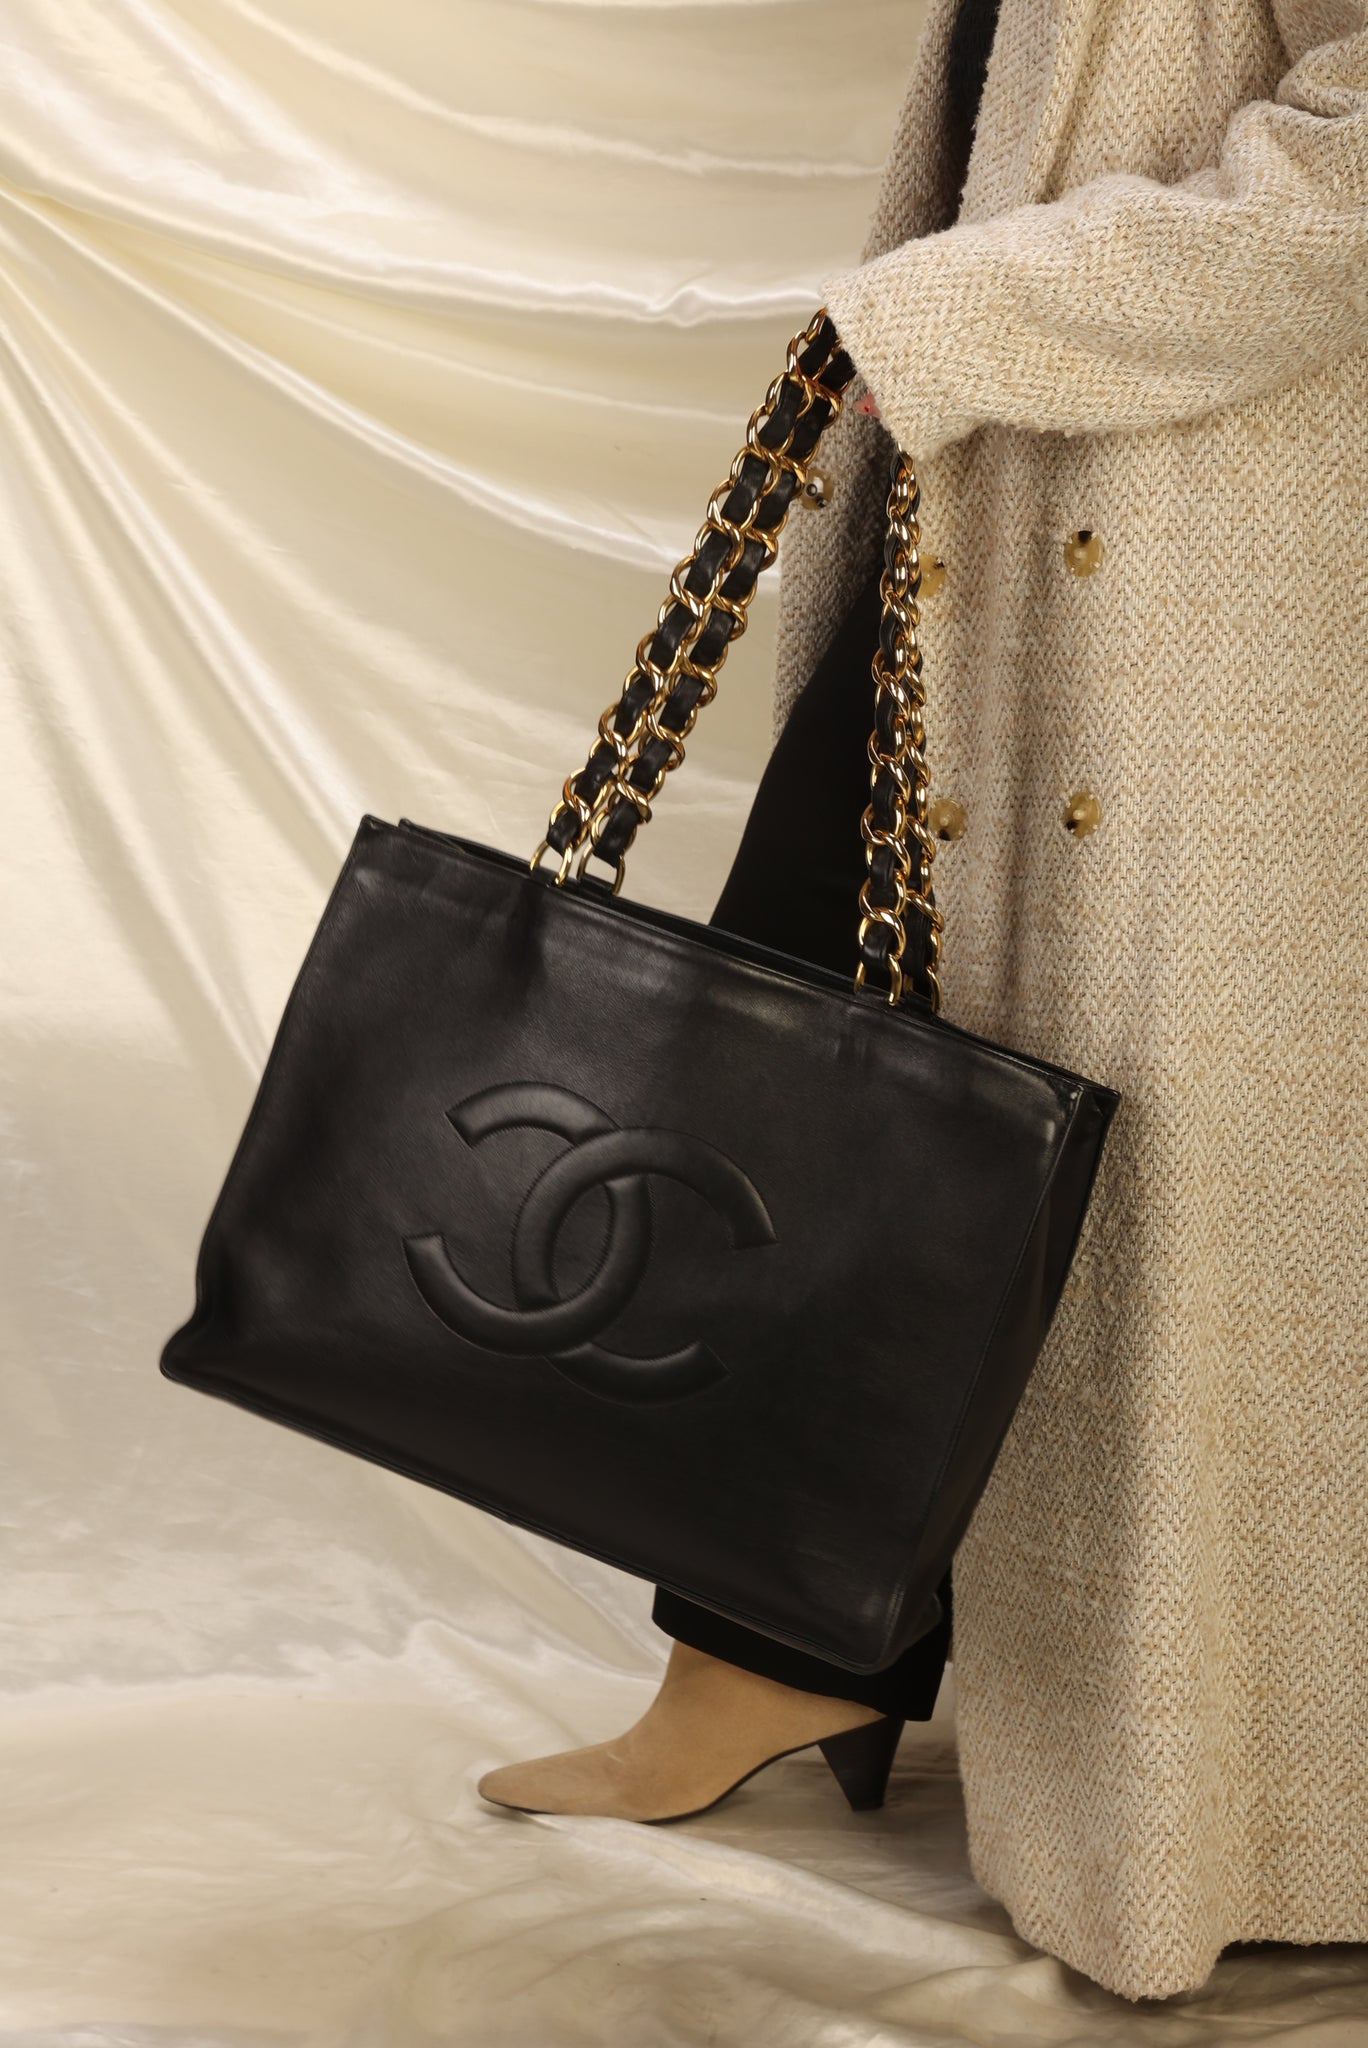 Chanel Chain Tote - 272 For Sale on 1stDibs